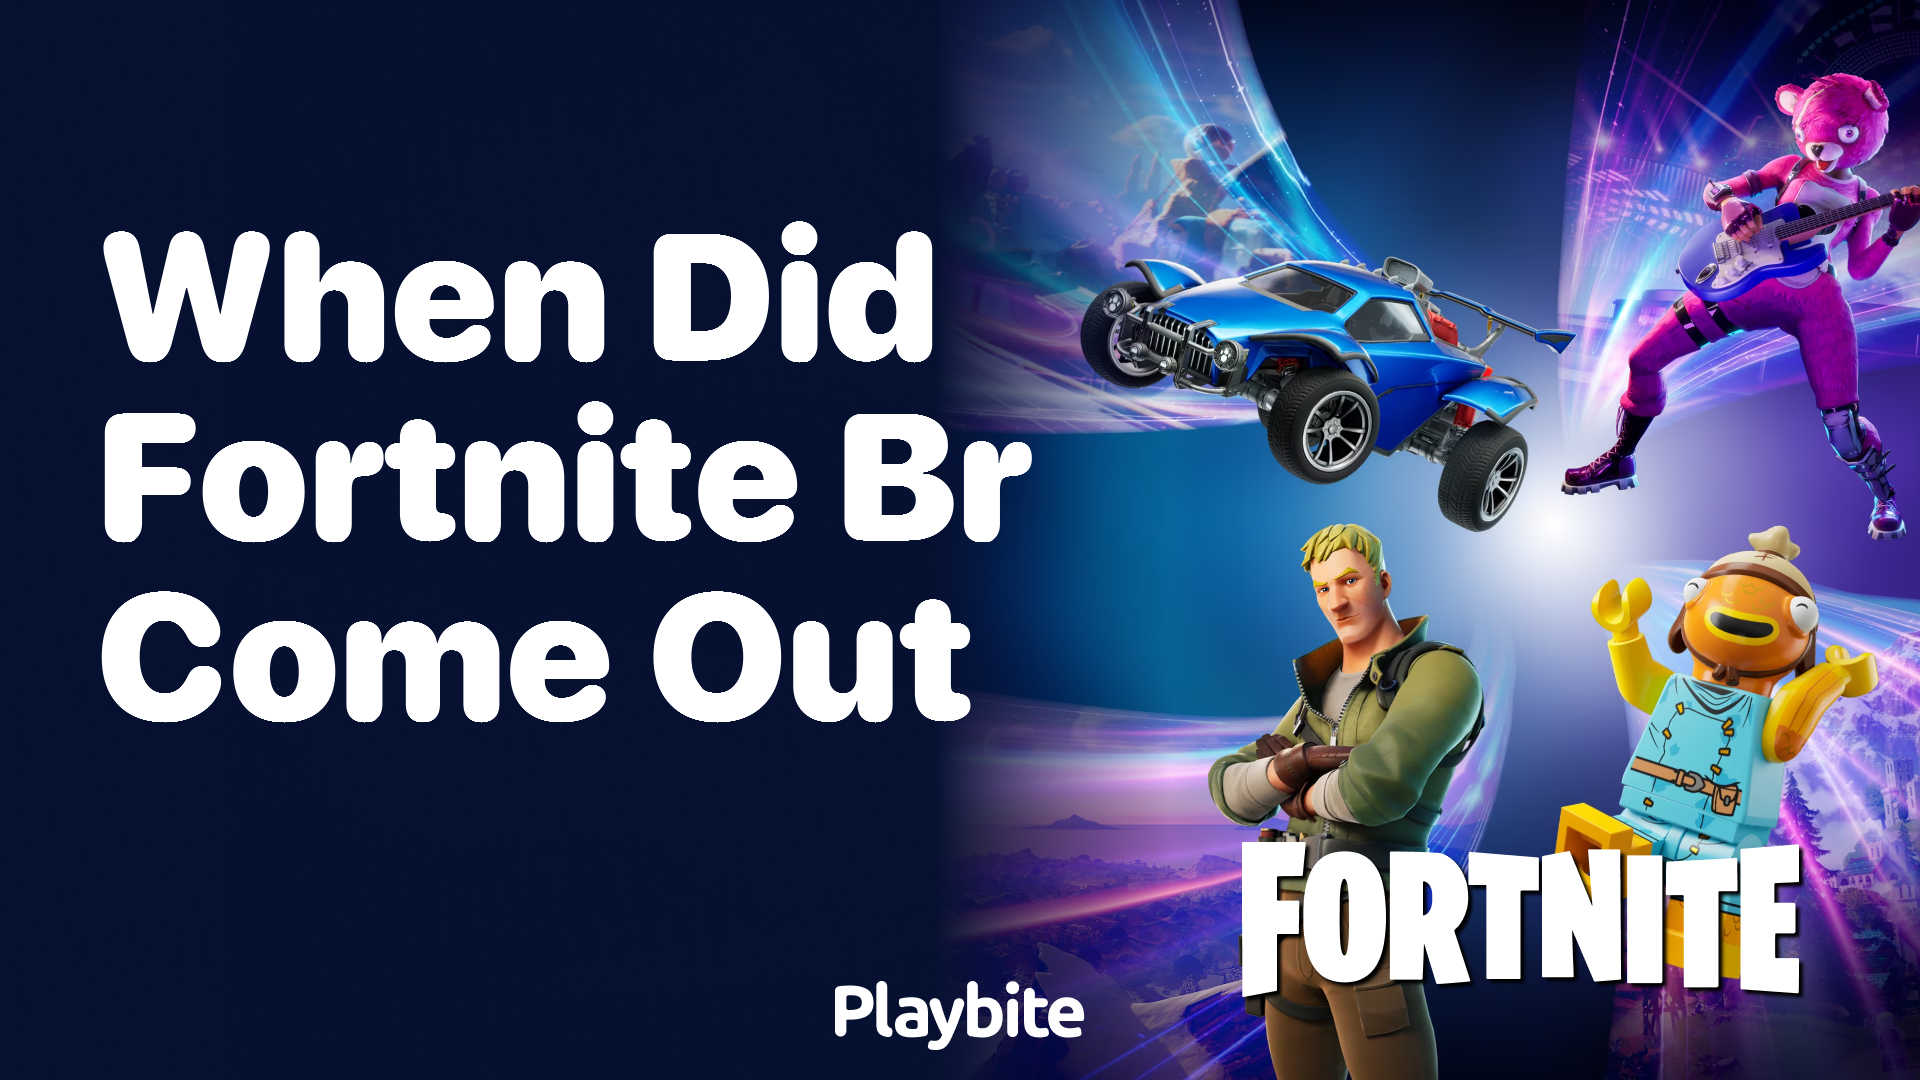 When Did Fortnite Battle Royale Make Its Exciting Debut?